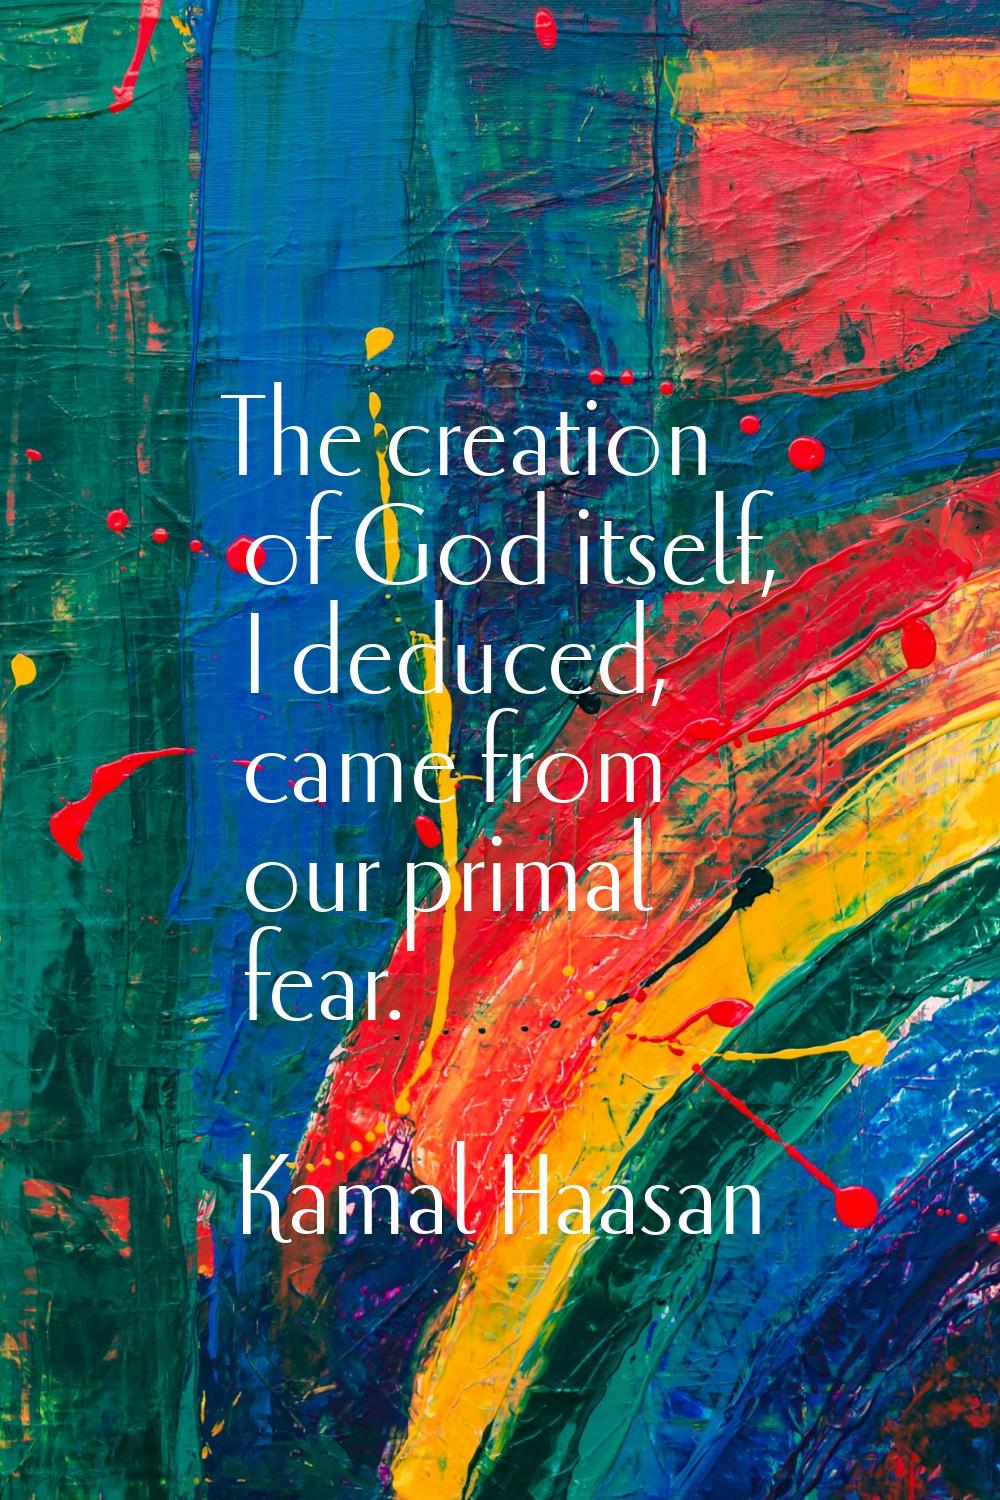 The creation of God itself, I deduced, came from our primal fear.